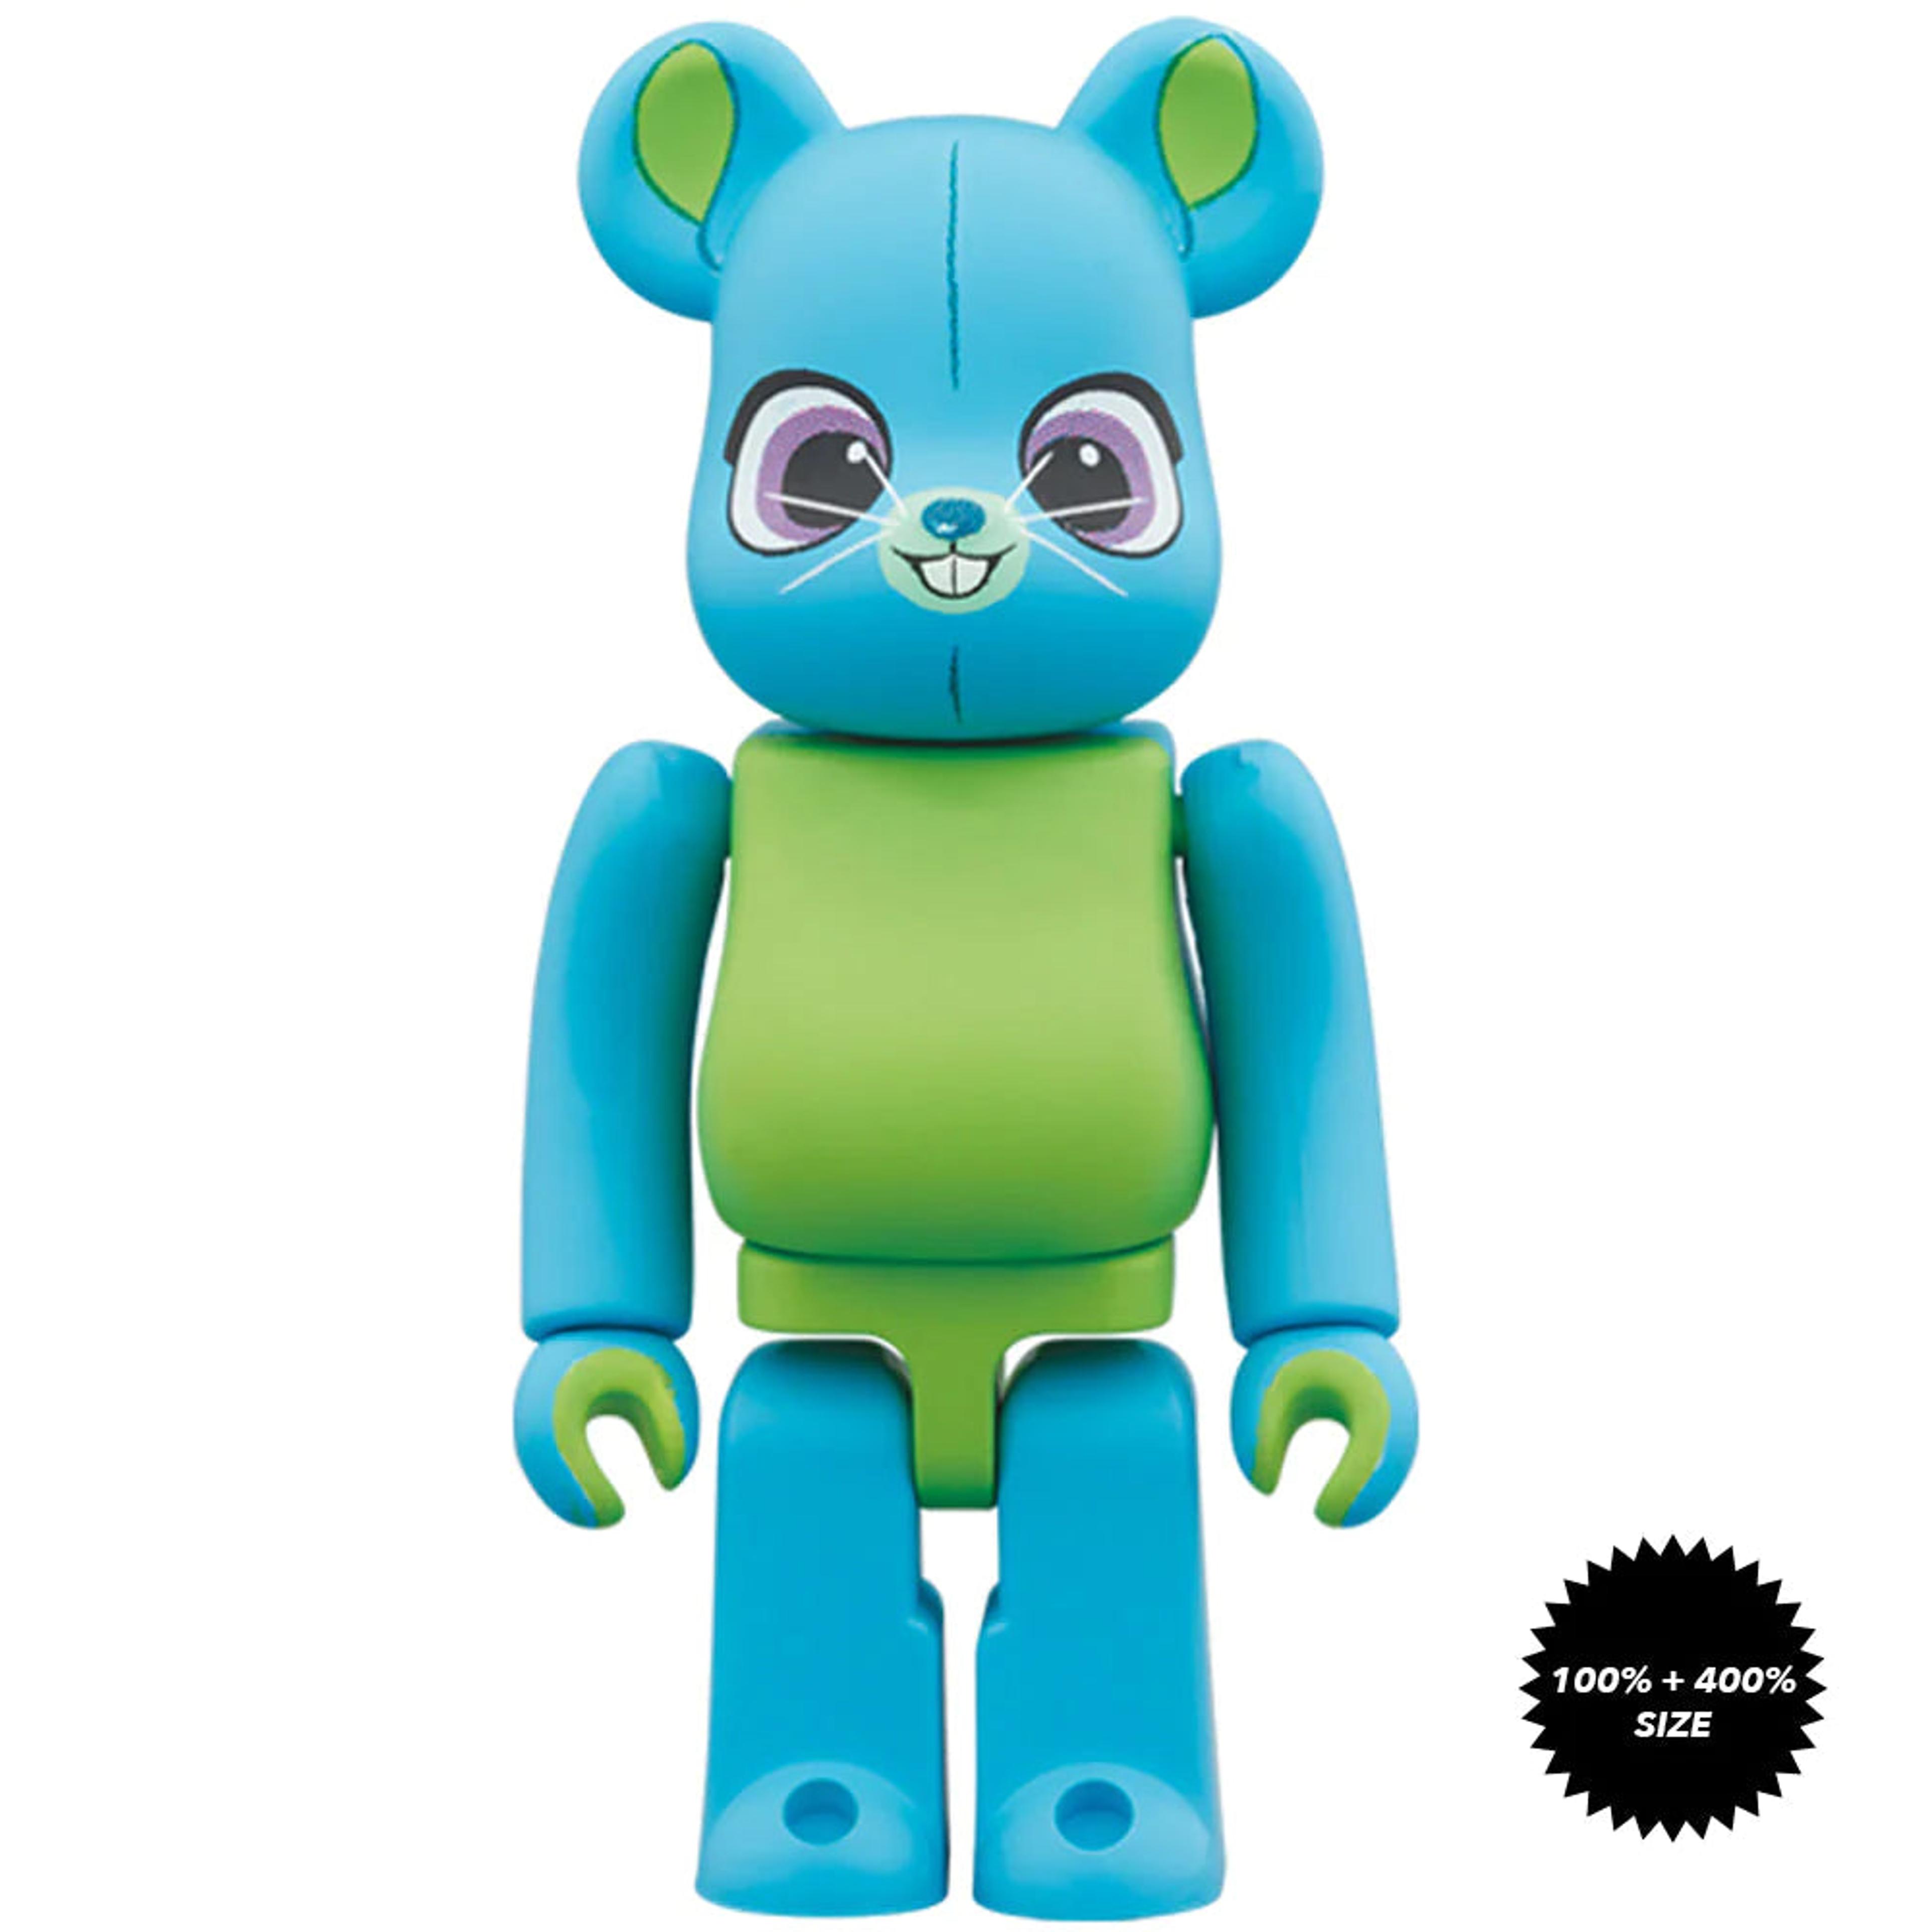 Alternate View 1 of BE@RBRICK TOY STORY BUNNY 400％ + 100%